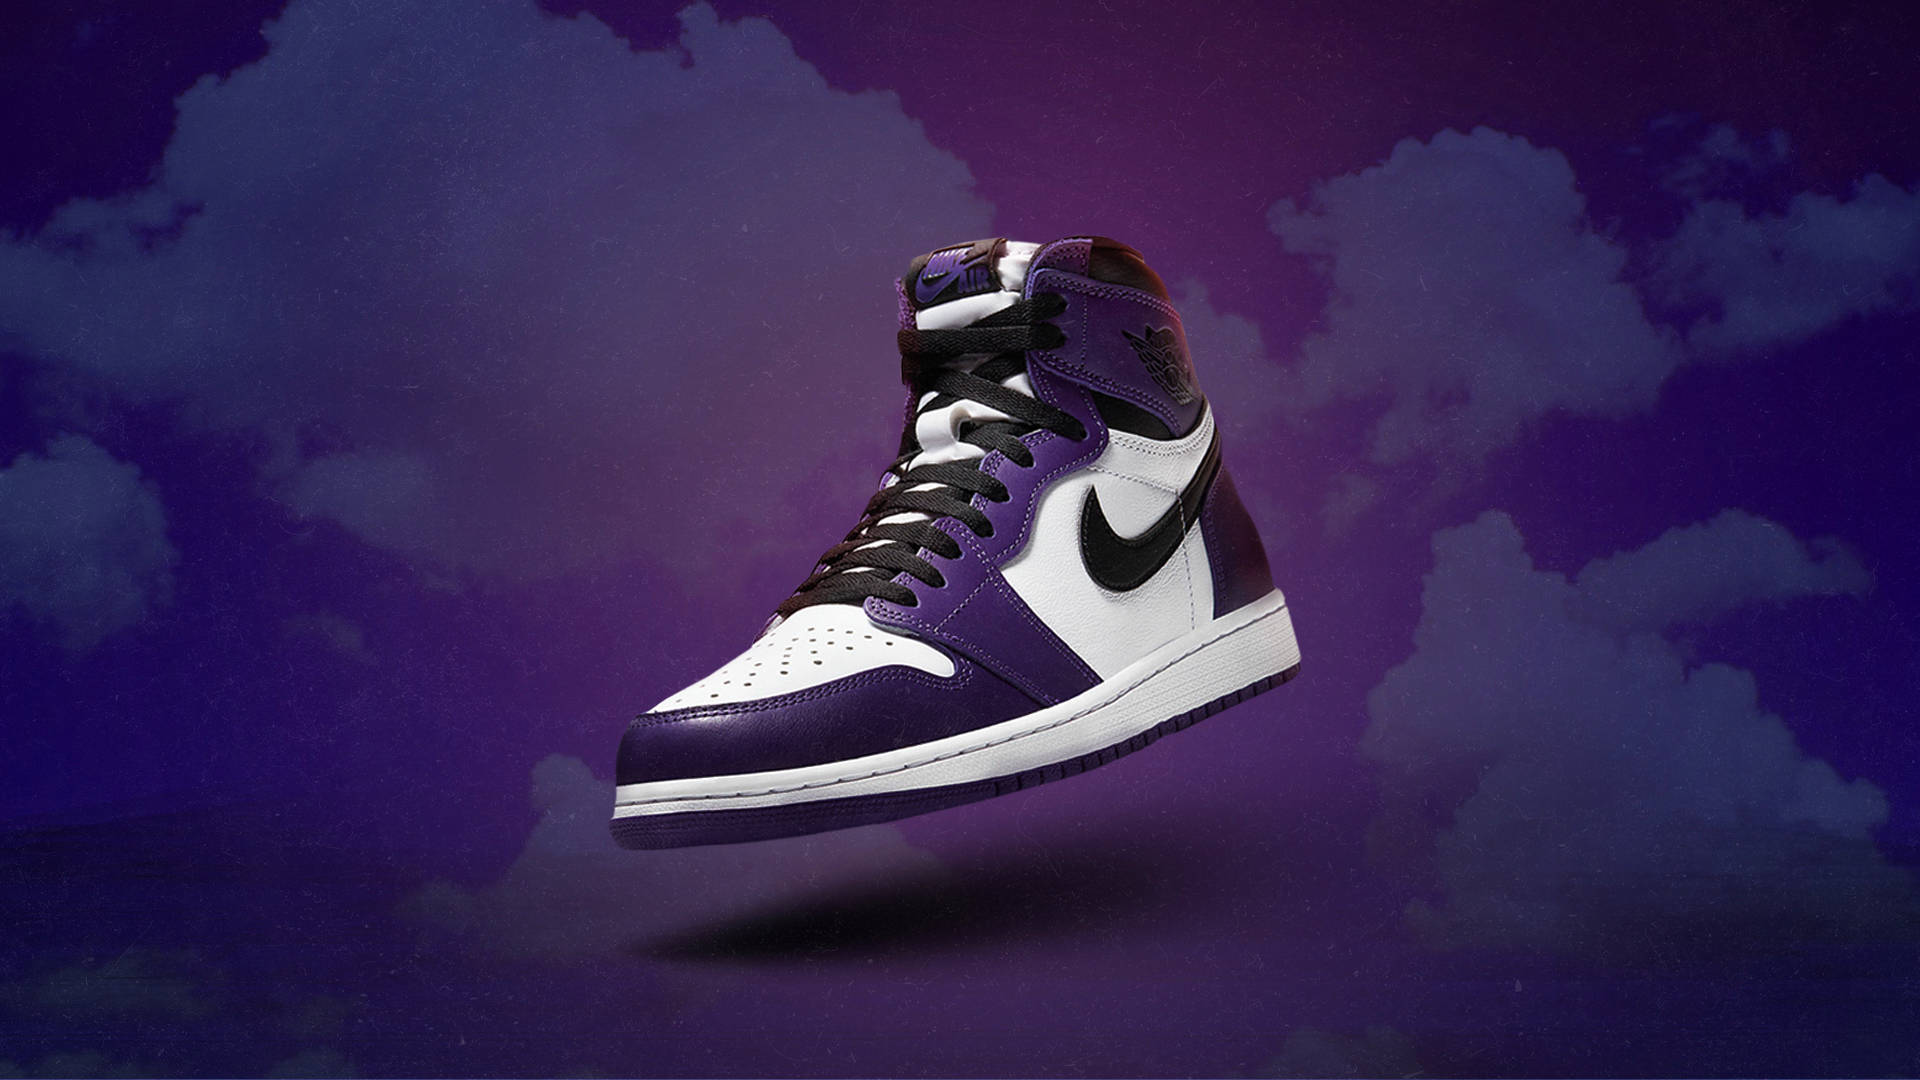 Download A Purple And White Air Jordan 1 Is Flying In The Sky Wallpaper ...